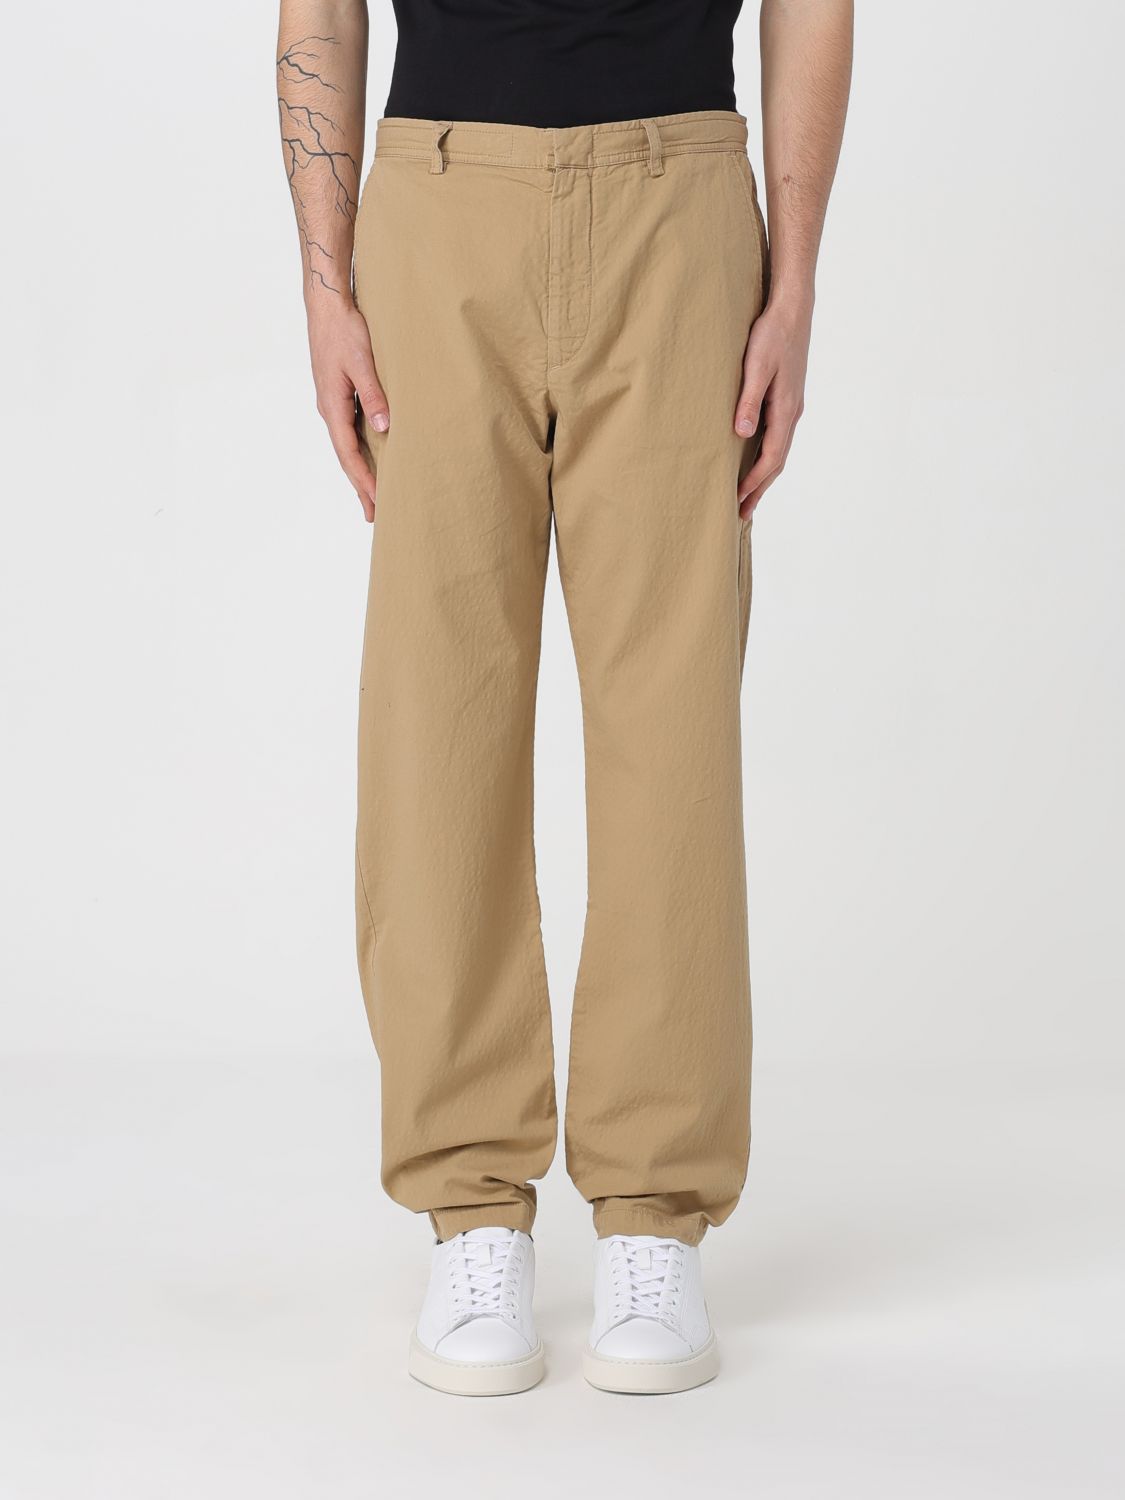 Ps By Paul Smith Pants Ps Paul Smith Men Color Sand